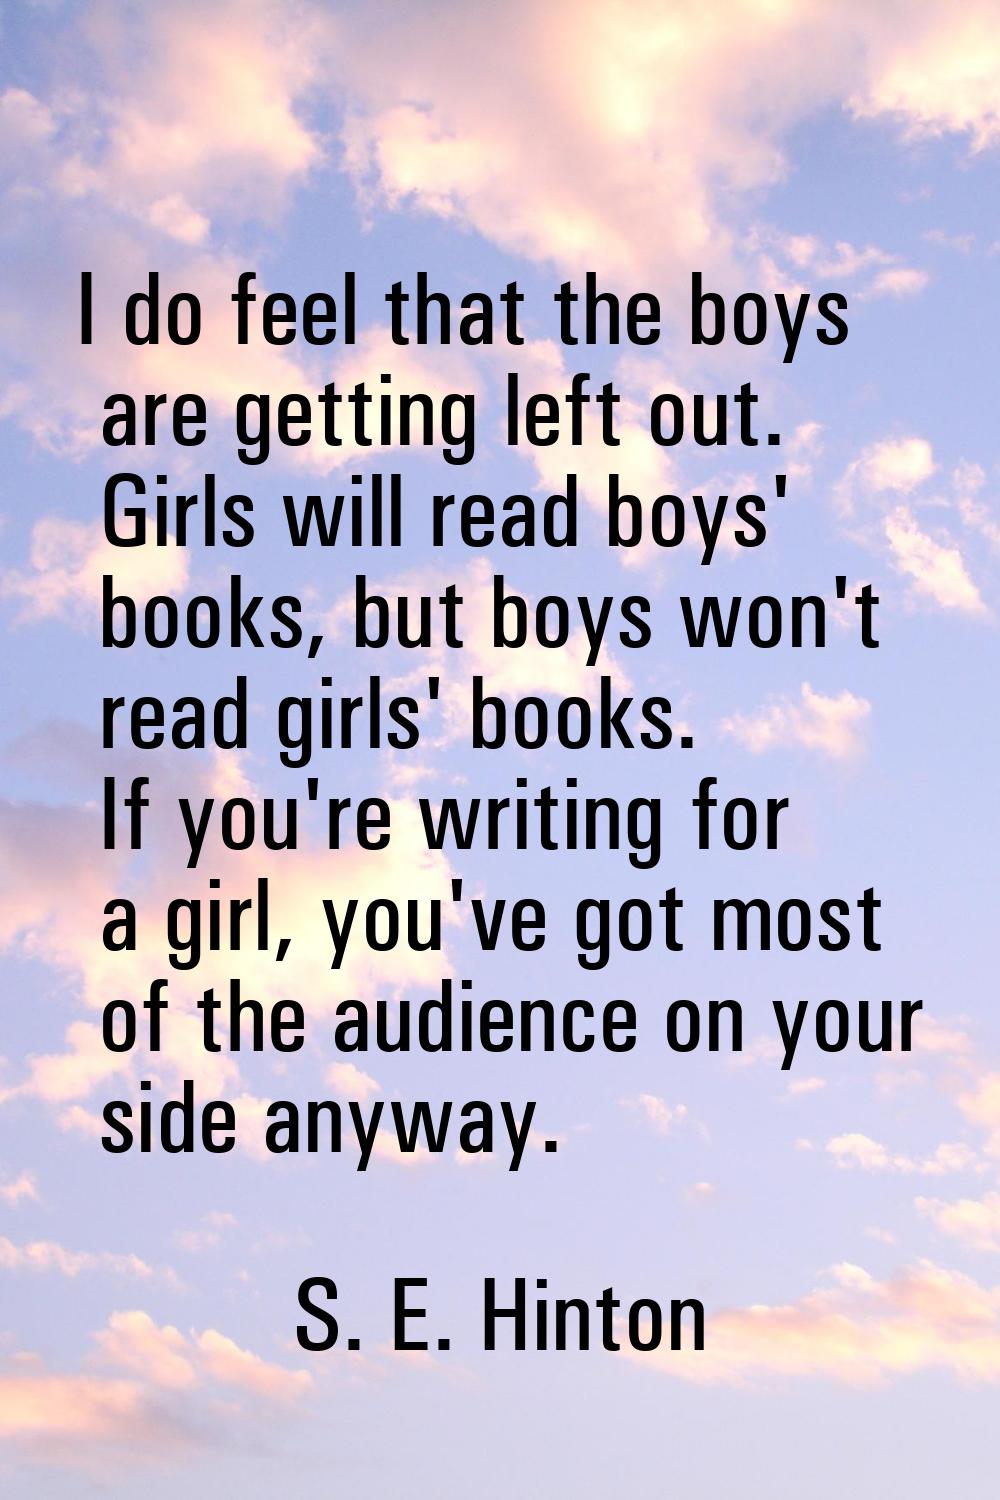 I do feel that the boys are getting left out. Girls will read boys' books, but boys won't read girl